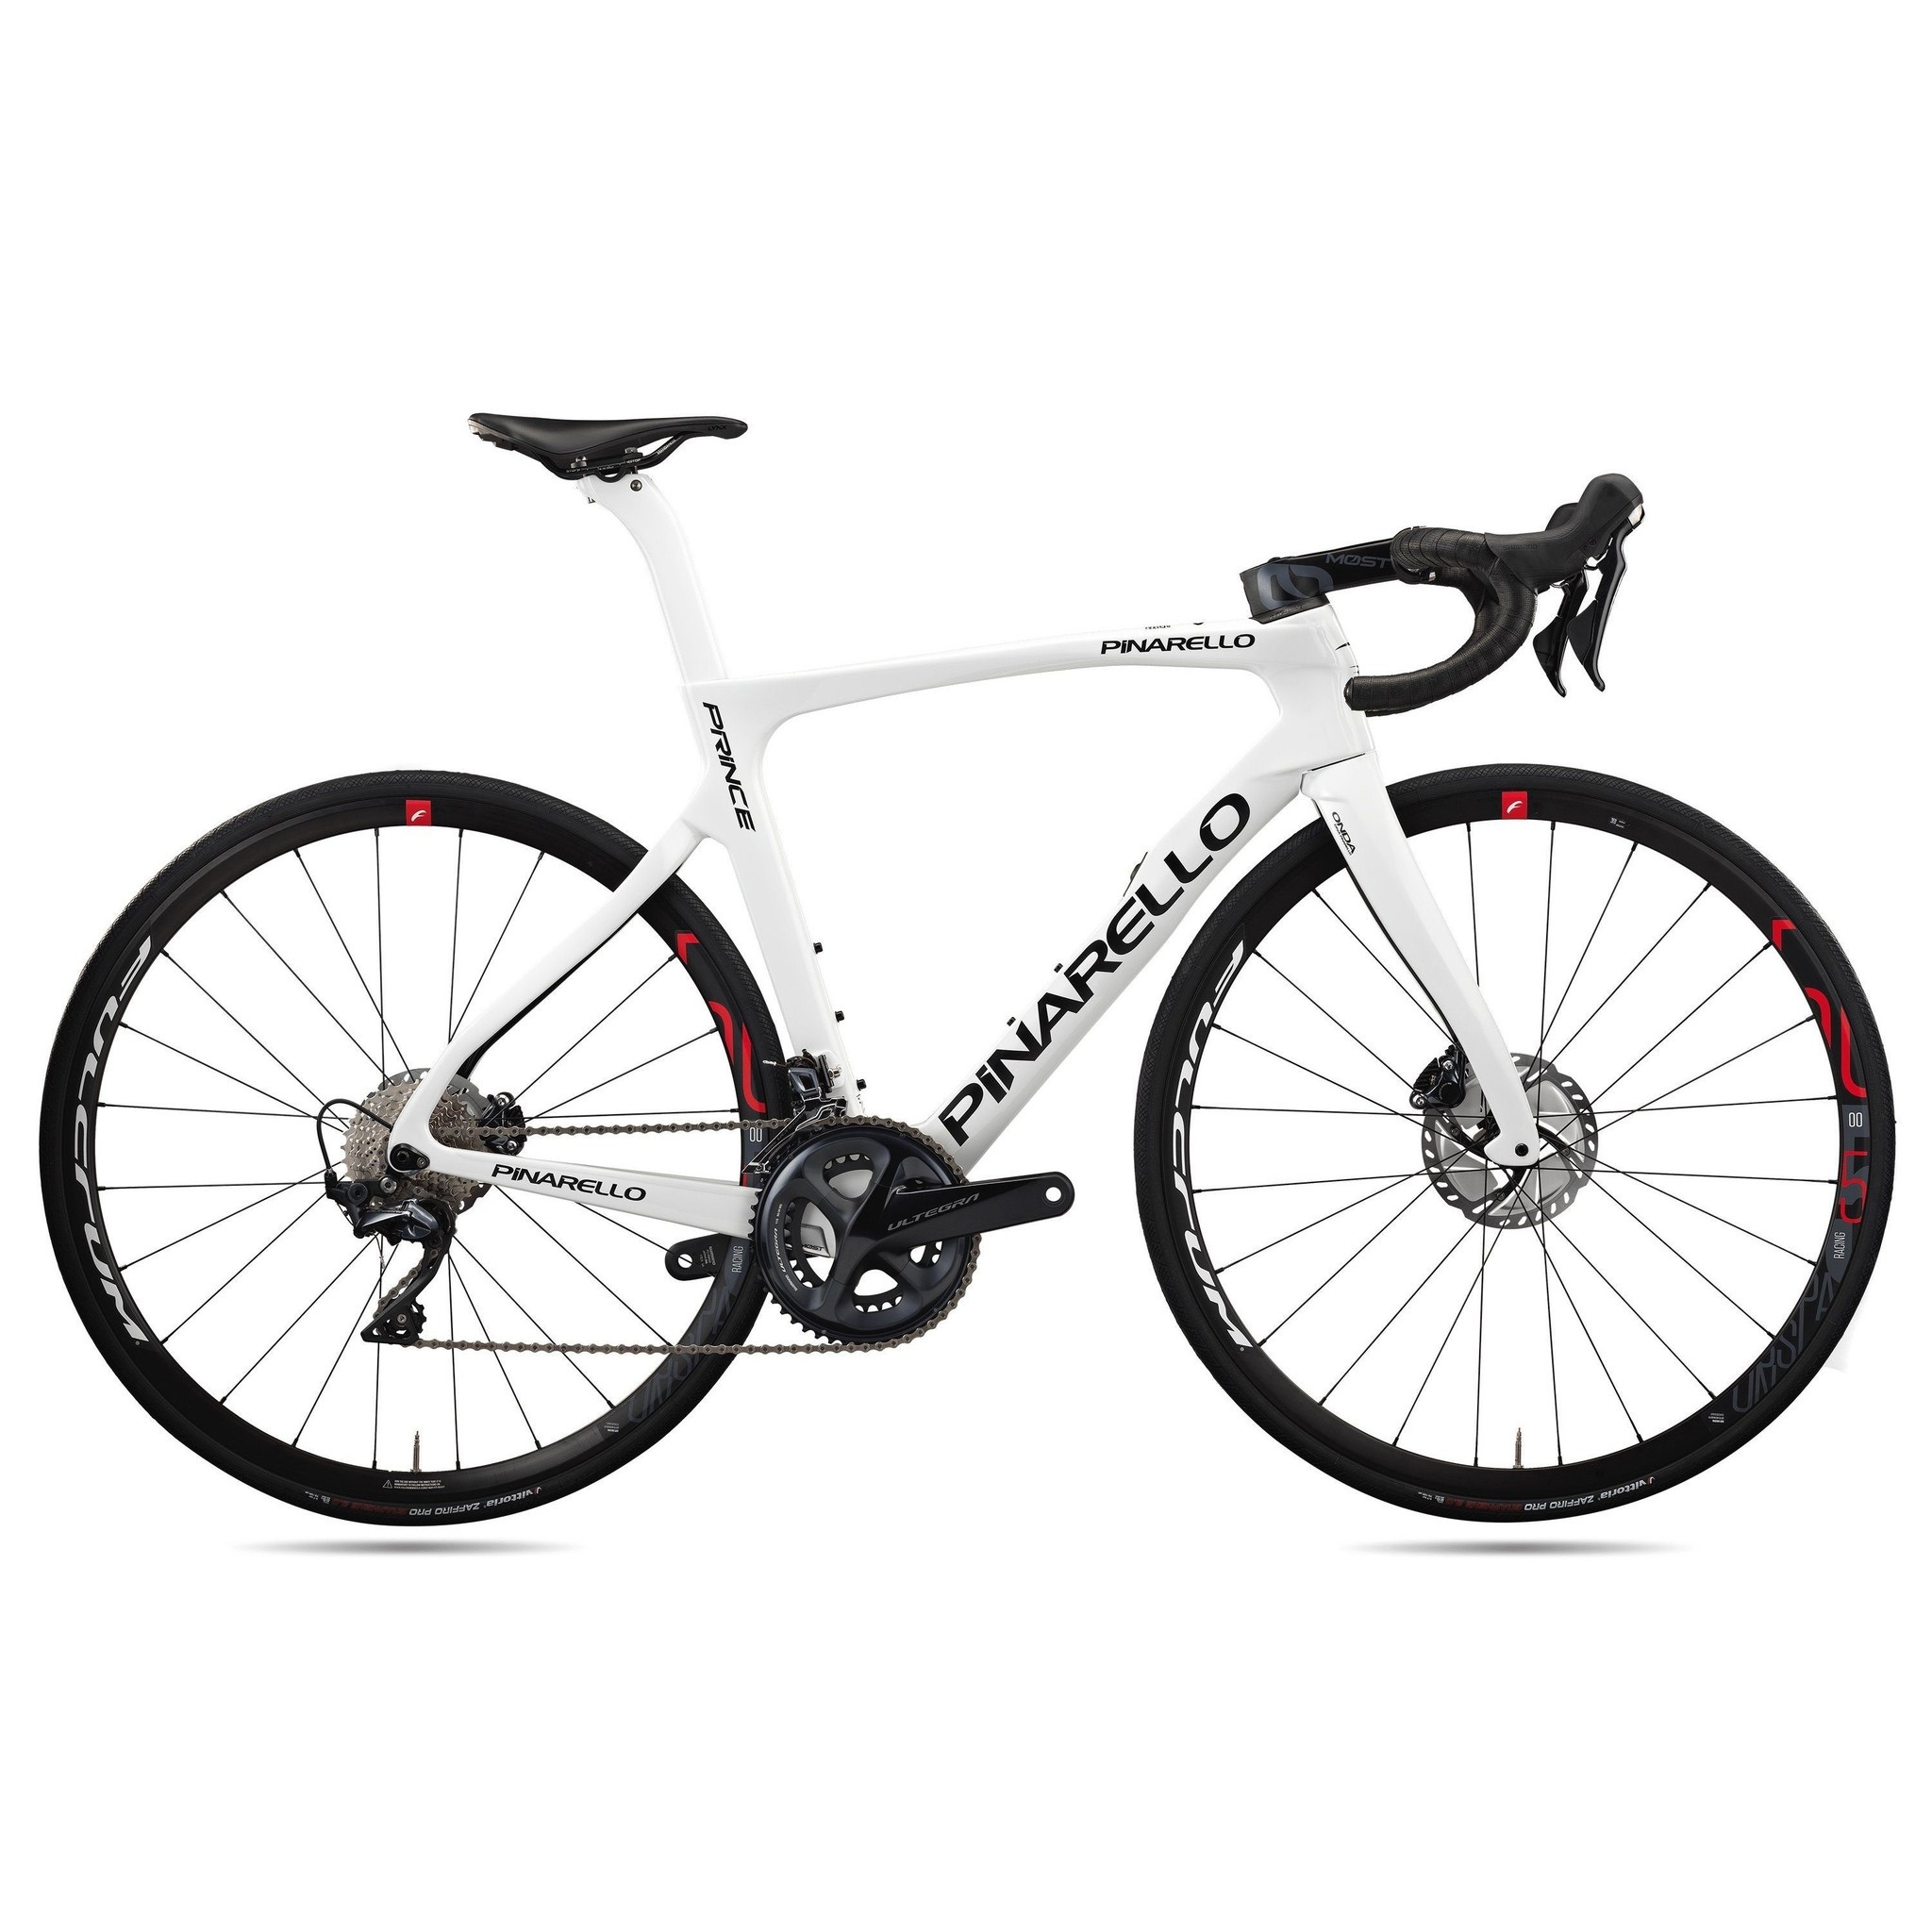 Pinarello Bicycle, Prince disk, SRAM Force AXS, Cutting-edge technology, 2050x2050 HD Handy